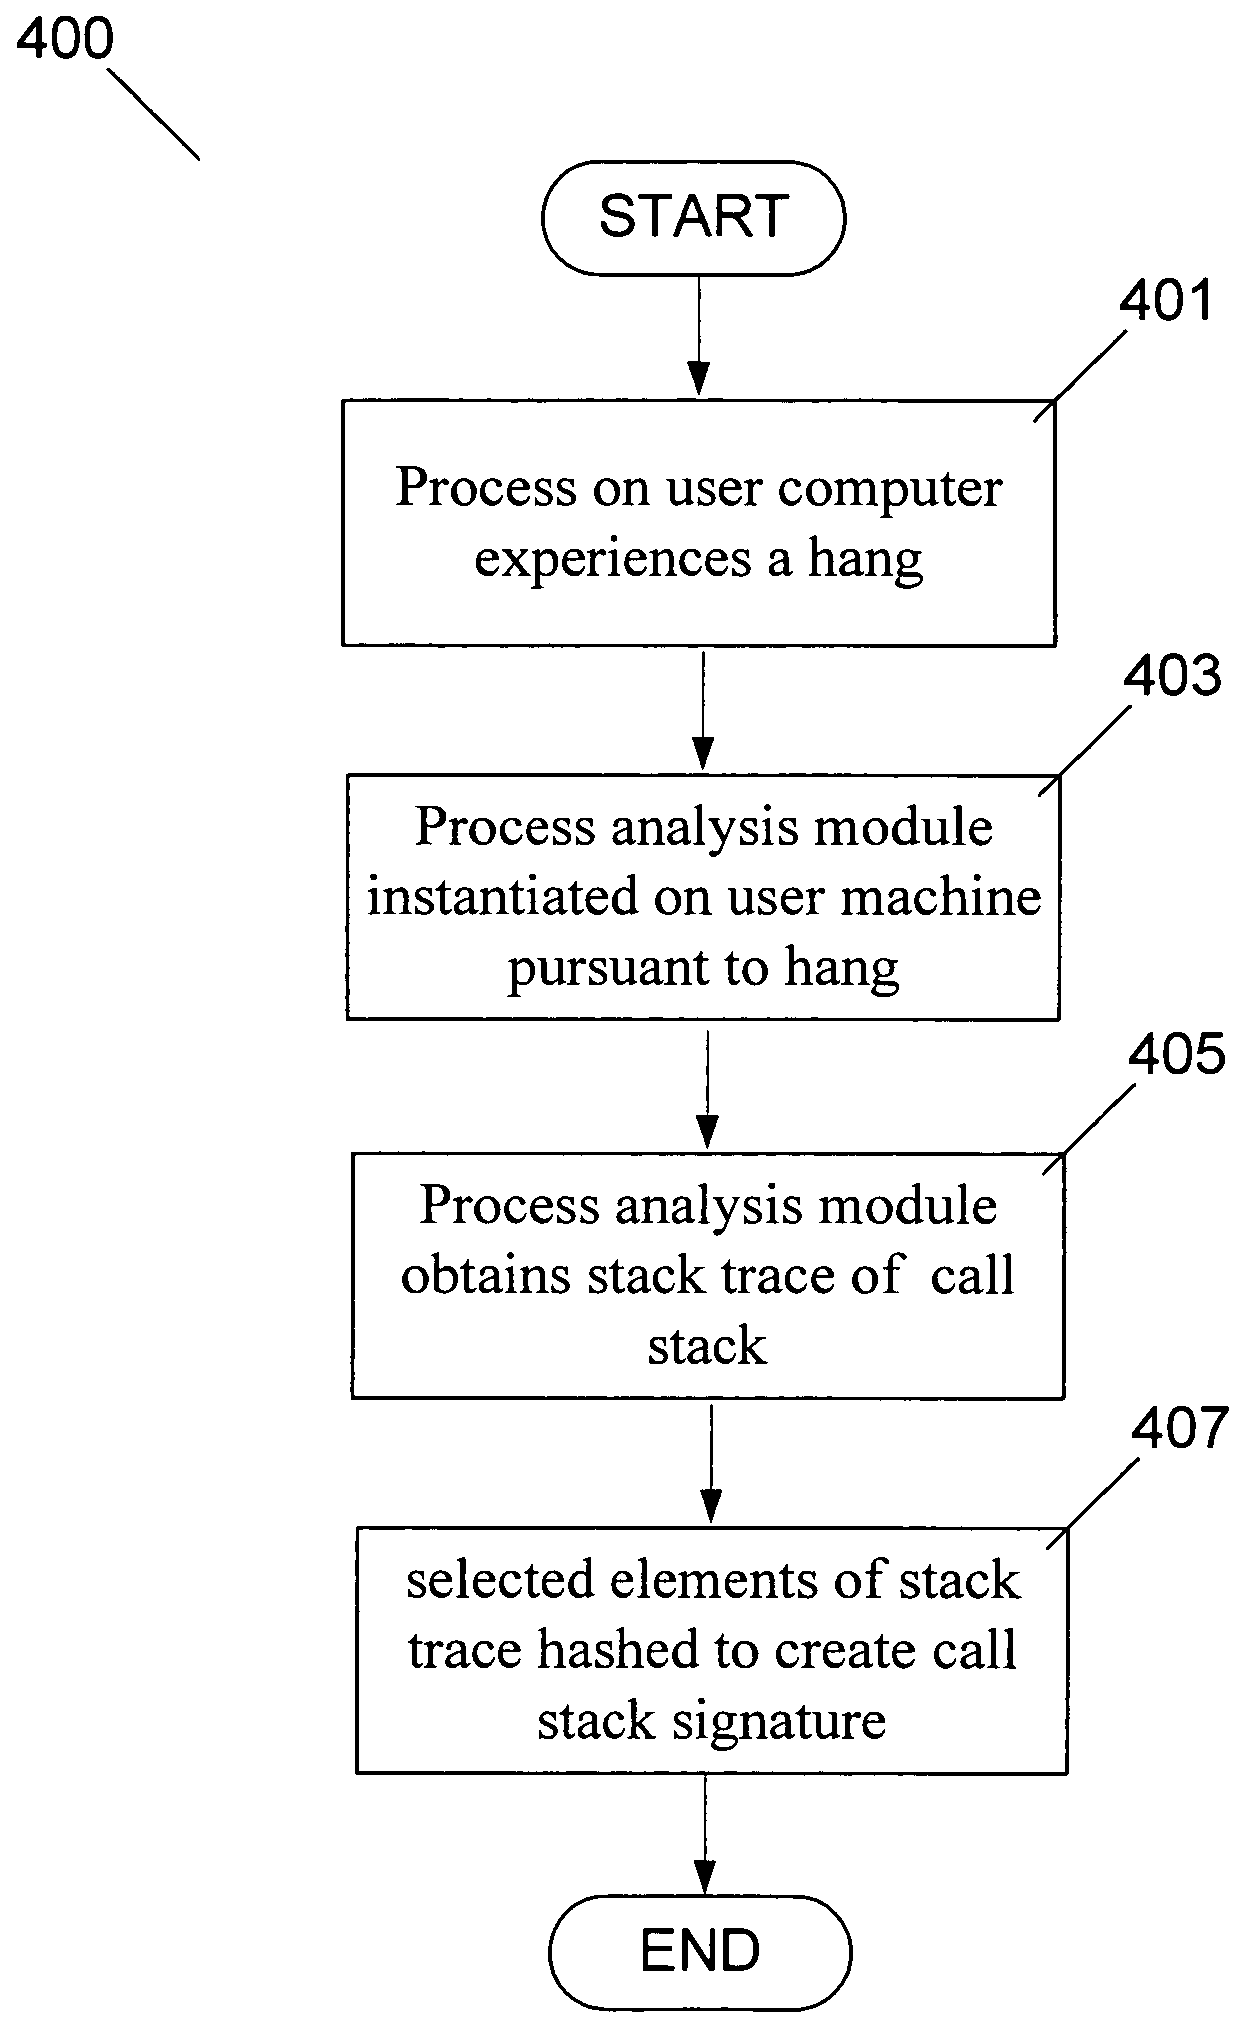 Using a call stack hash to record the state of a process